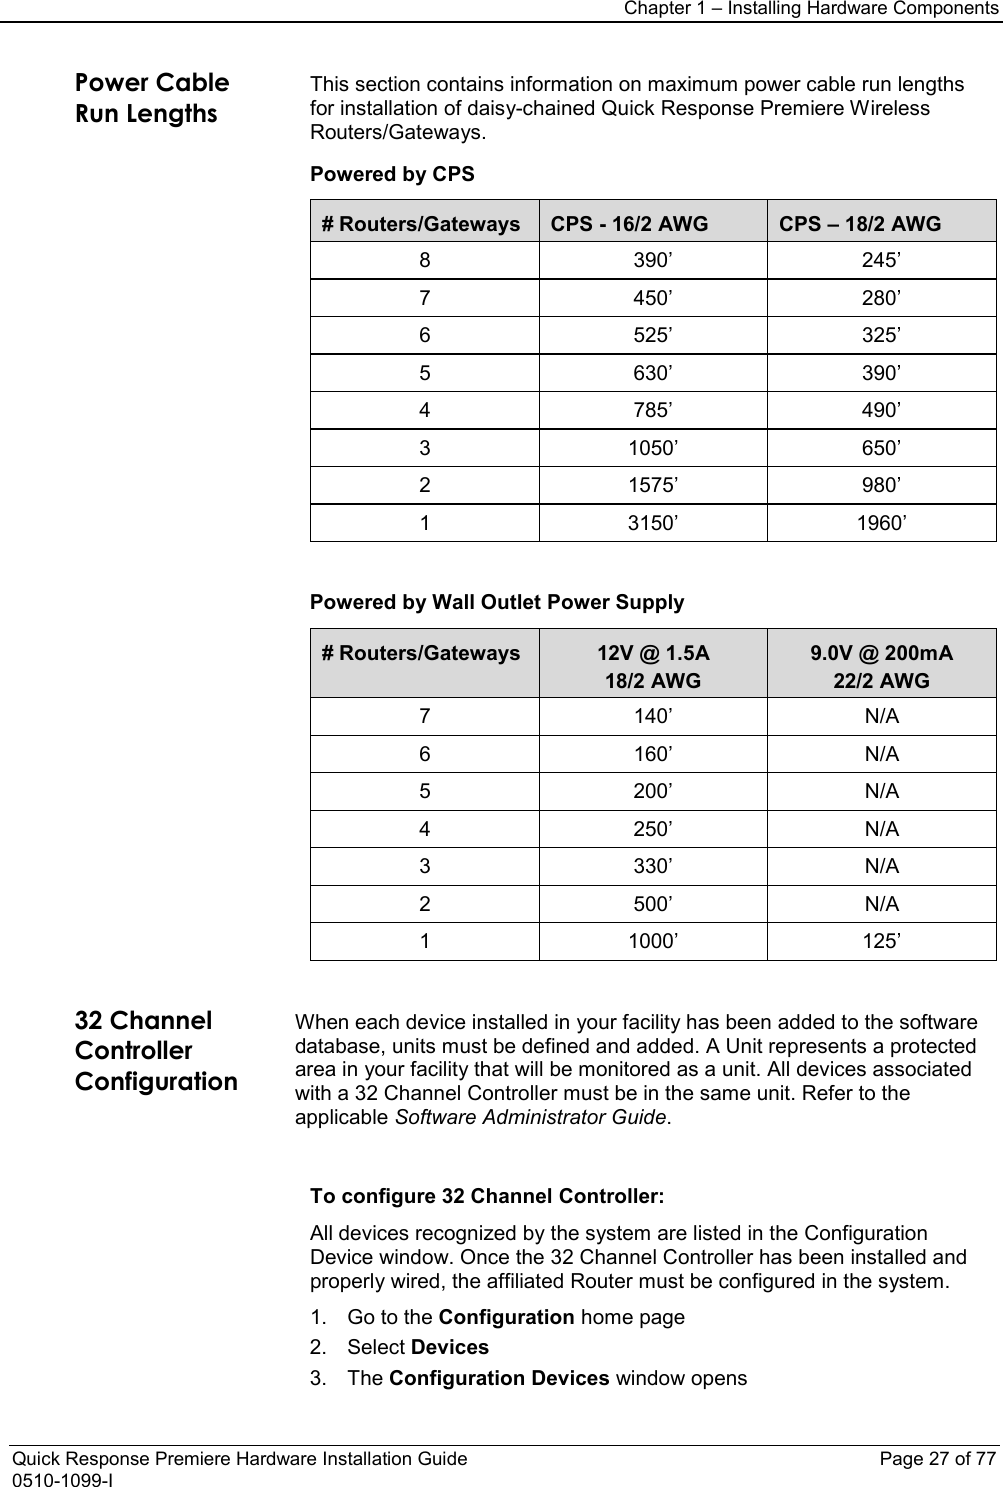 Chapter 1 – Installing Hardware Components  Quick Response Premiere Hardware Installation Guide    Page 27 of 77 0510-1099-I Power Cable Run Lengths This section contains information on maximum power cable run lengths for installation of daisy-chained Quick Response Premiere Wireless Routers/Gateways.  Powered by CPS # Routers/Gateways CPS - 16/2 AWG CPS – 18/2 AWG 8  390’ 245’ 7  450’ 280’ 6  525’ 325’ 5  630’ 390’ 4  785’ 490’ 3  1050’ 650’ 2  1575’ 980’ 1  3150’ 1960’      Powered by Wall Outlet Power Supply # Routers/Gateways 12V @ 1.5A 18/2 AWG 9.0V @ 200mA 22/2 AWG 7  140’ N/A 6  160’ N/A 5  200’ N/A 4  250’ N/A 3  330’ N/A 2  500’ N/A 1  1000’ 125’     32 Channel Controller Configuration When each device installed in your facility has been added to the software database, units must be defined and added. A Unit represents a protected area in your facility that will be monitored as a unit. All devices associated with a 32 Channel Controller must be in the same unit. Refer to the applicable Software Administrator Guide.   To configure 32 Channel Controller: All devices recognized by the system are listed in the Configuration Device window. Once the 32 Channel Controller has been installed and properly wired, the affiliated Router must be configured in the system. 1. Go to the Configuration home page 2. Select Devices 3. The Configuration Devices window opens 